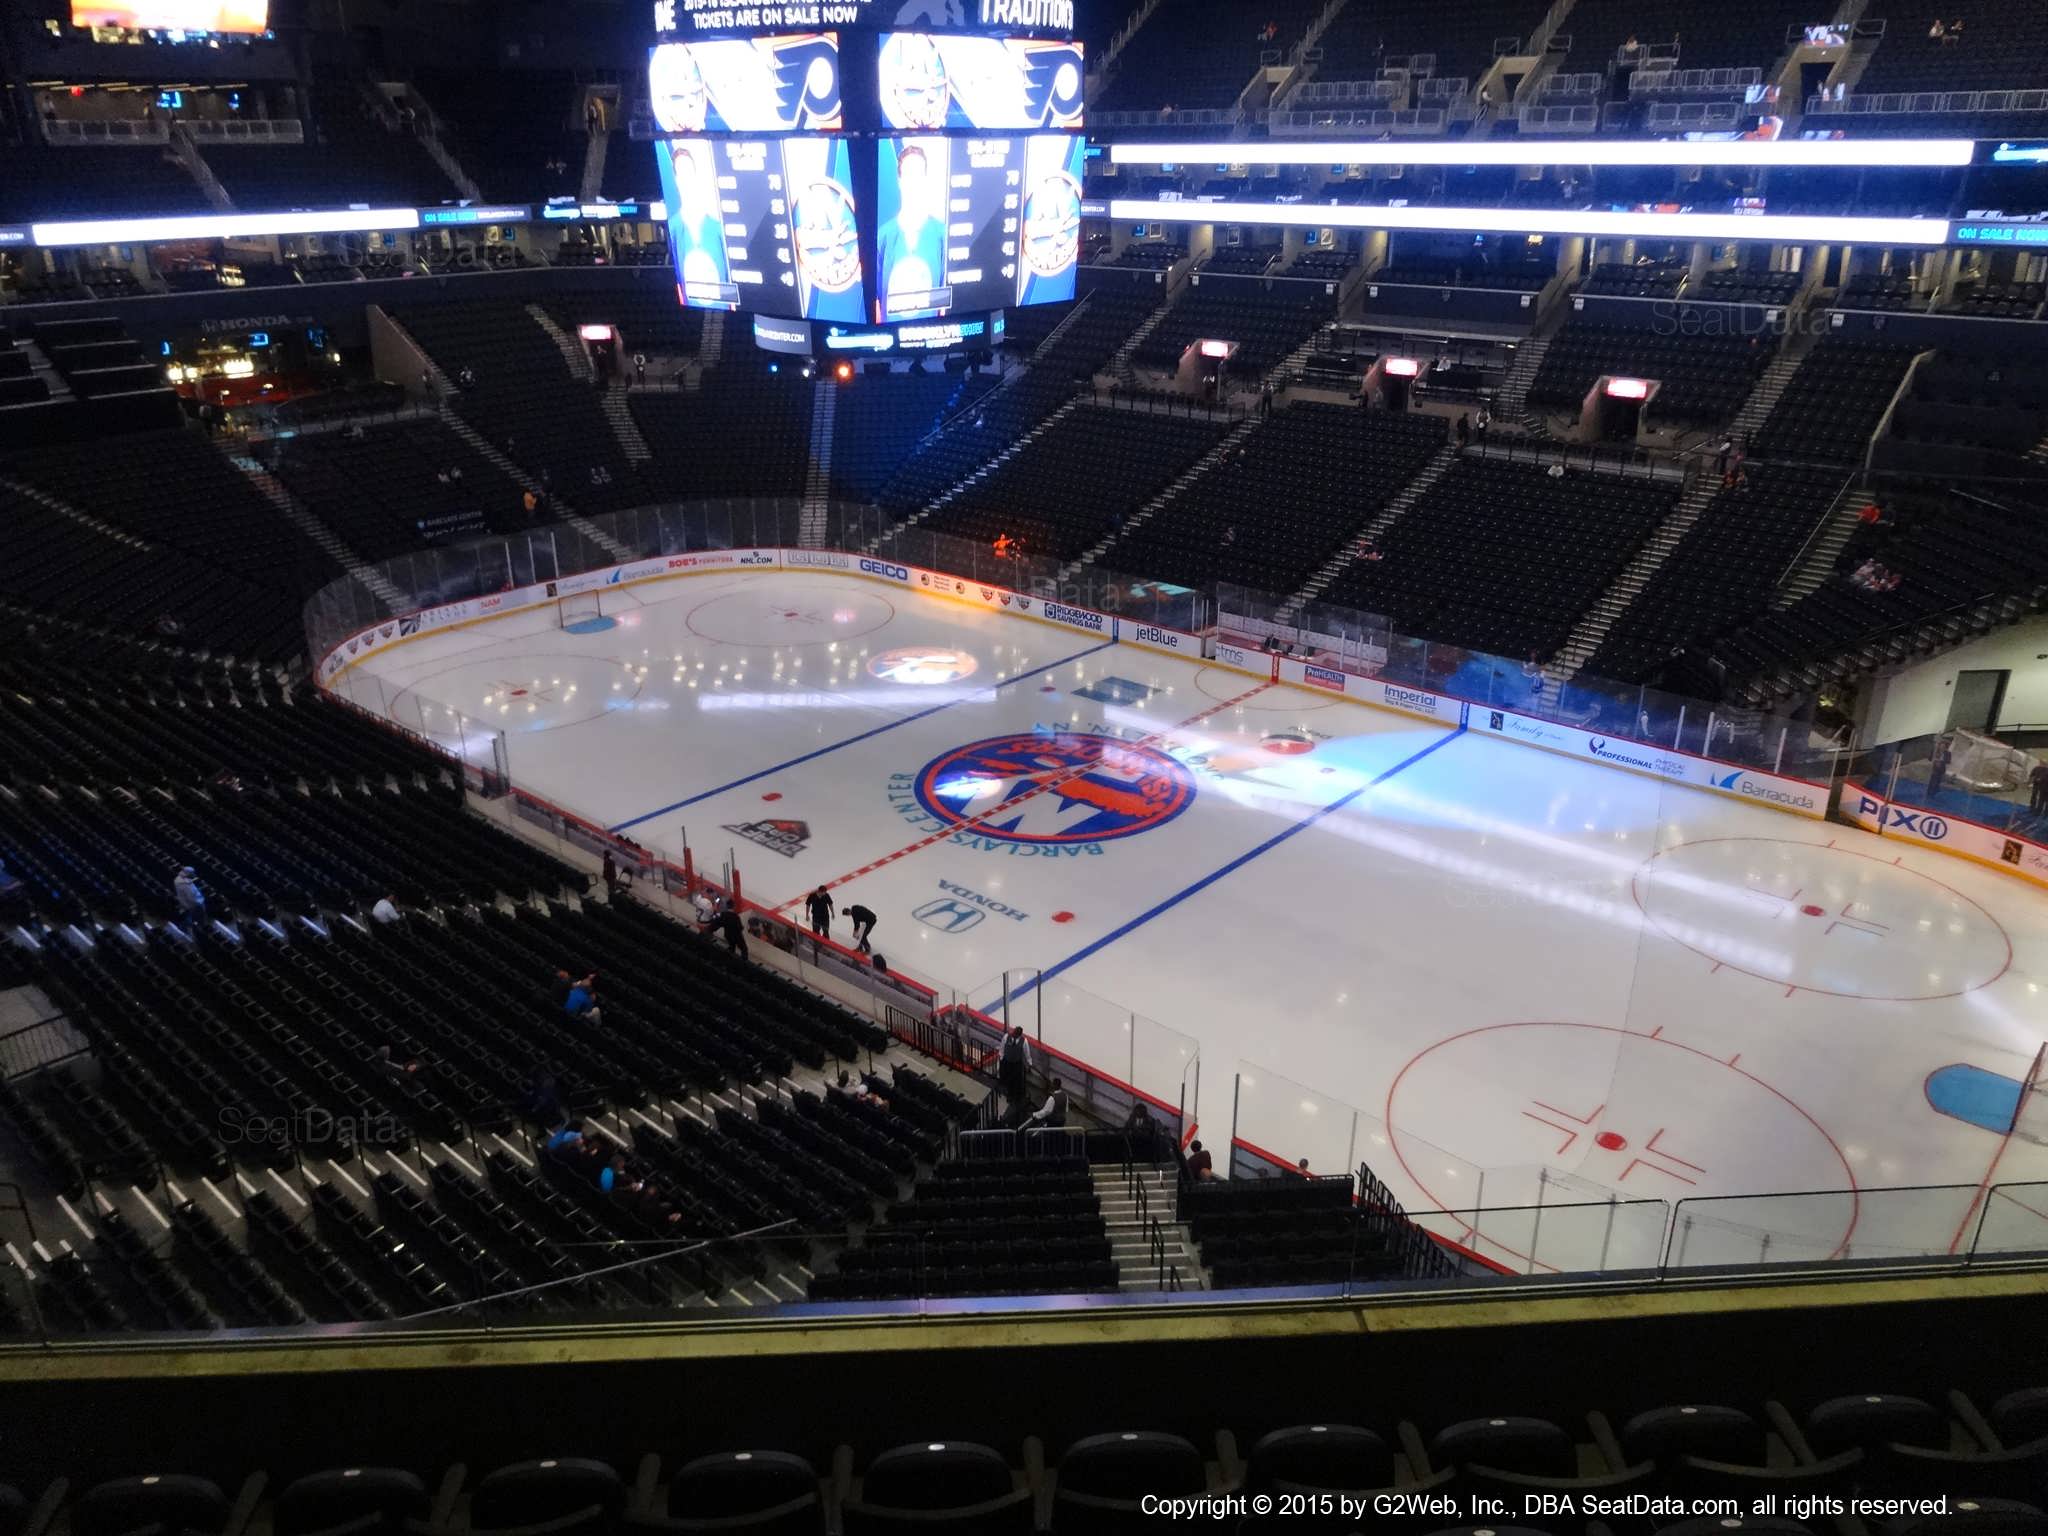 Seat View from Section 204 at the Barclays Center, home of the New York Islanders